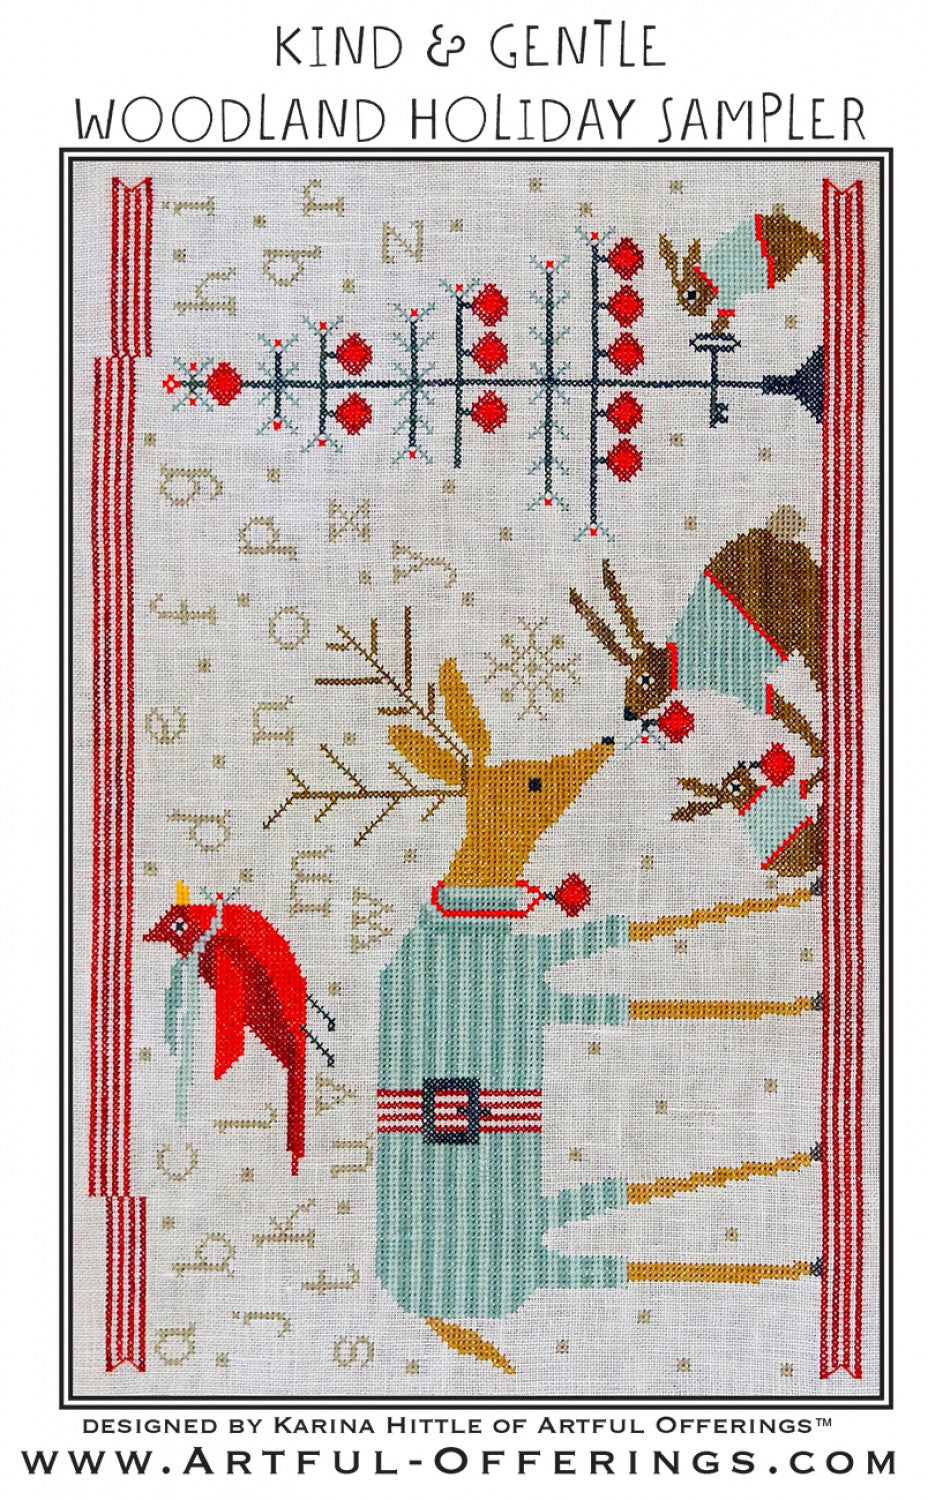 Kind & Gentle Woodland Holiday Sampler Pattern. It shows a deer a bunny and a bird. 